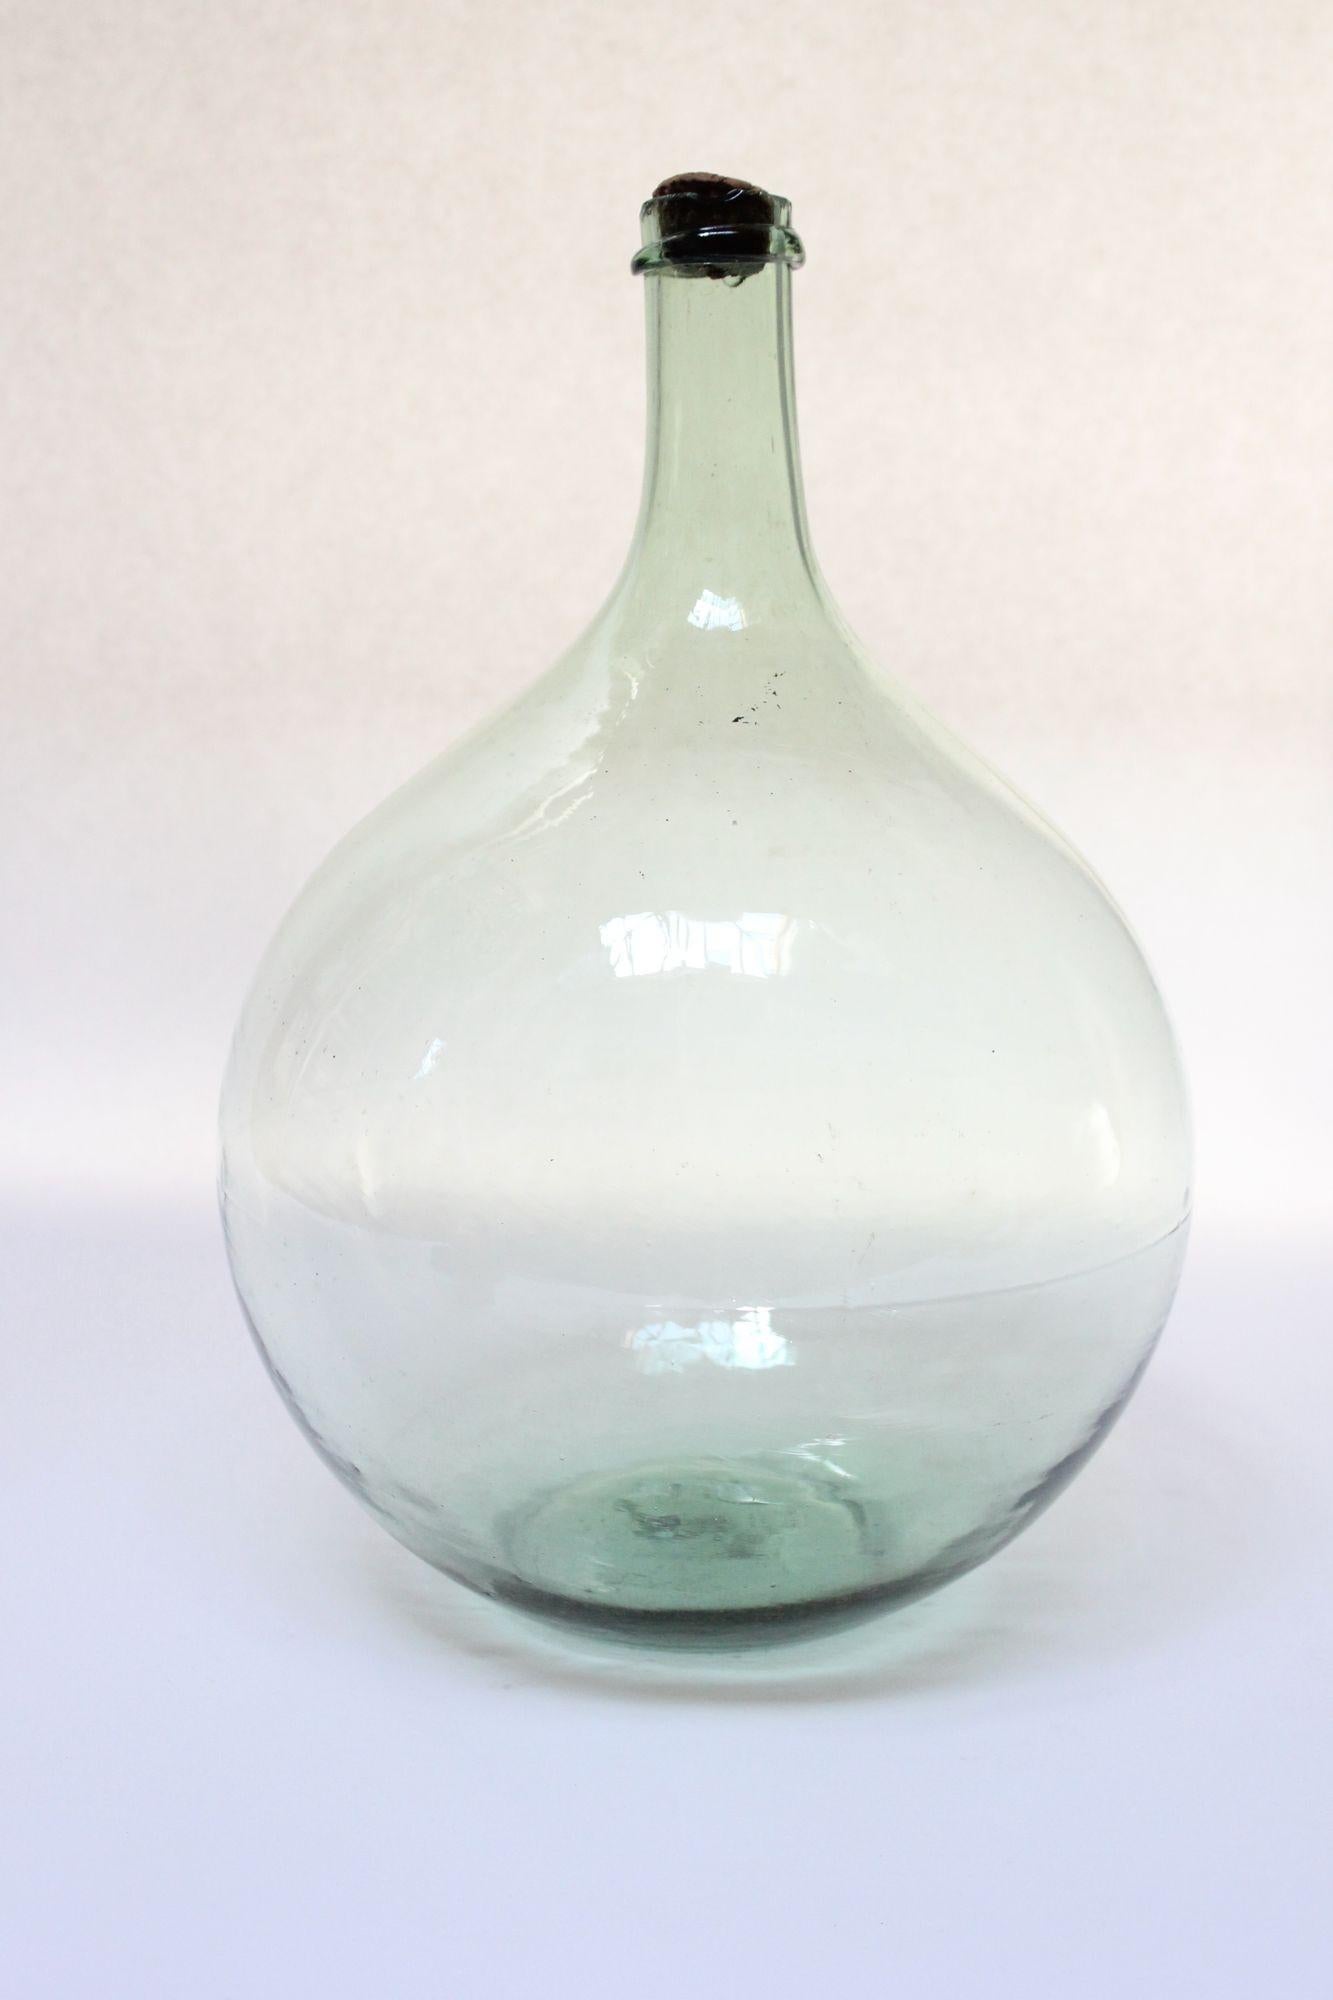 Pale green demijohn/carboy originally used for transporting wine (ca. Early 20th Century, France).
Composed of 'blown-to-mold' glass (a method accepted as 'hand-blowing') exhibiting trapped air bubbles within the glass itself with a sheared lip and